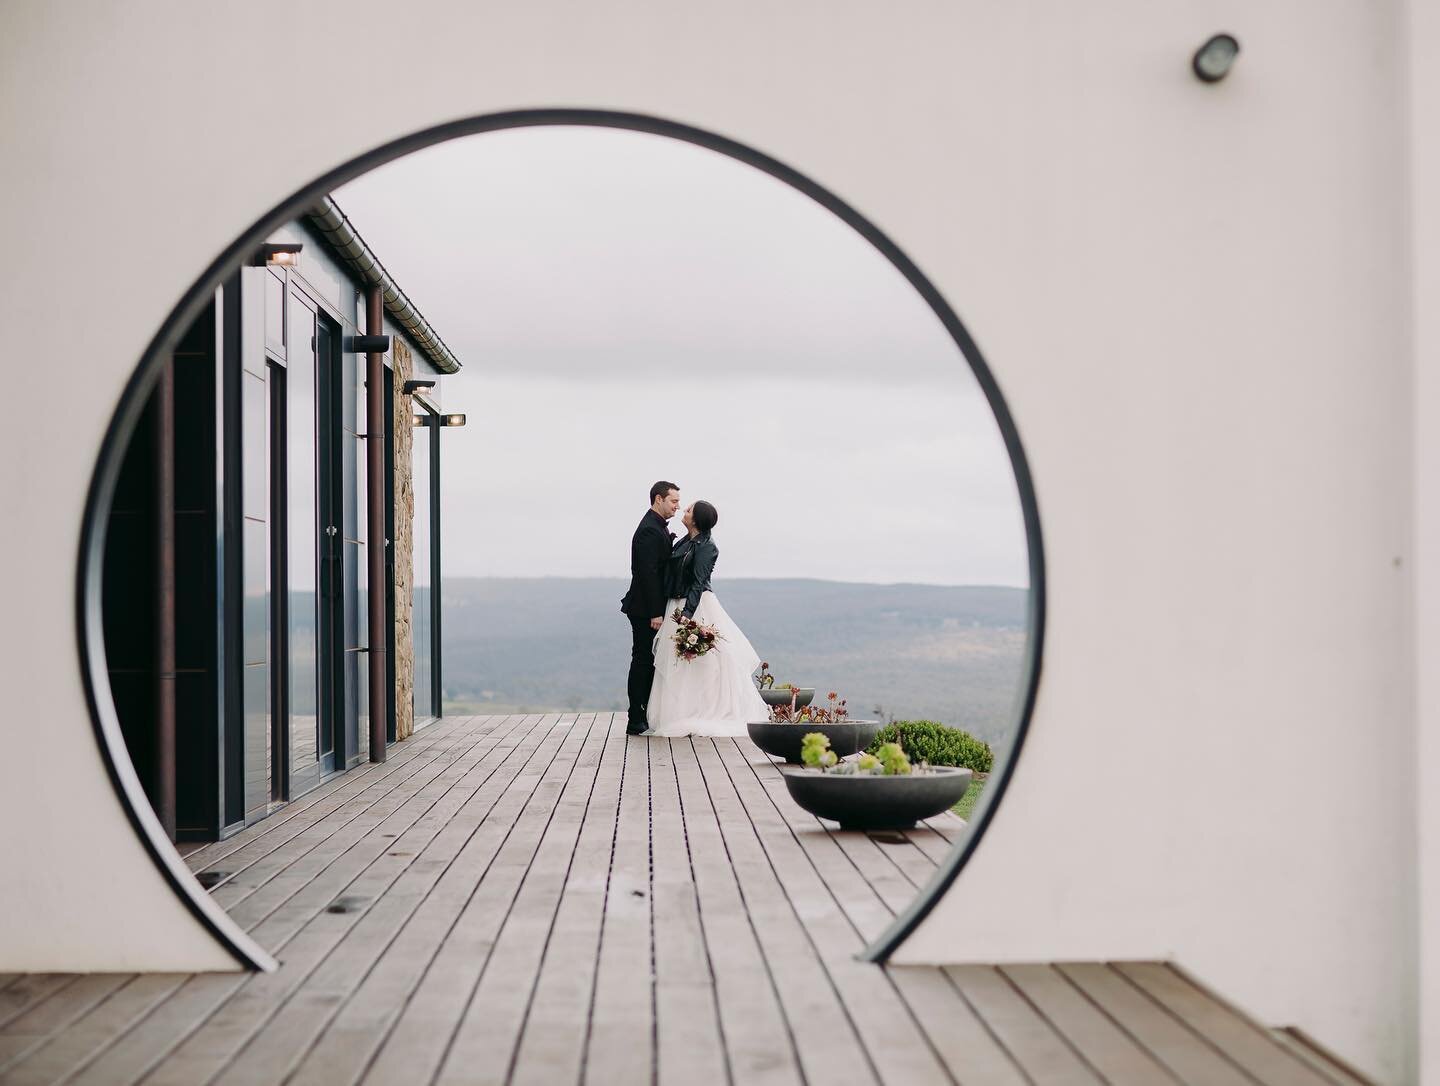 Sarah + Corey

These two lovebirds ditched the crowds (and expense) and chose to spend their $$ on a fabulous BnB atop Mt Franklin instead. 

Killer snaps - @leofarrellphoto 
Celebrant- @thefunkycelebrant 

#microwedding #elopement #melbourneelopemen